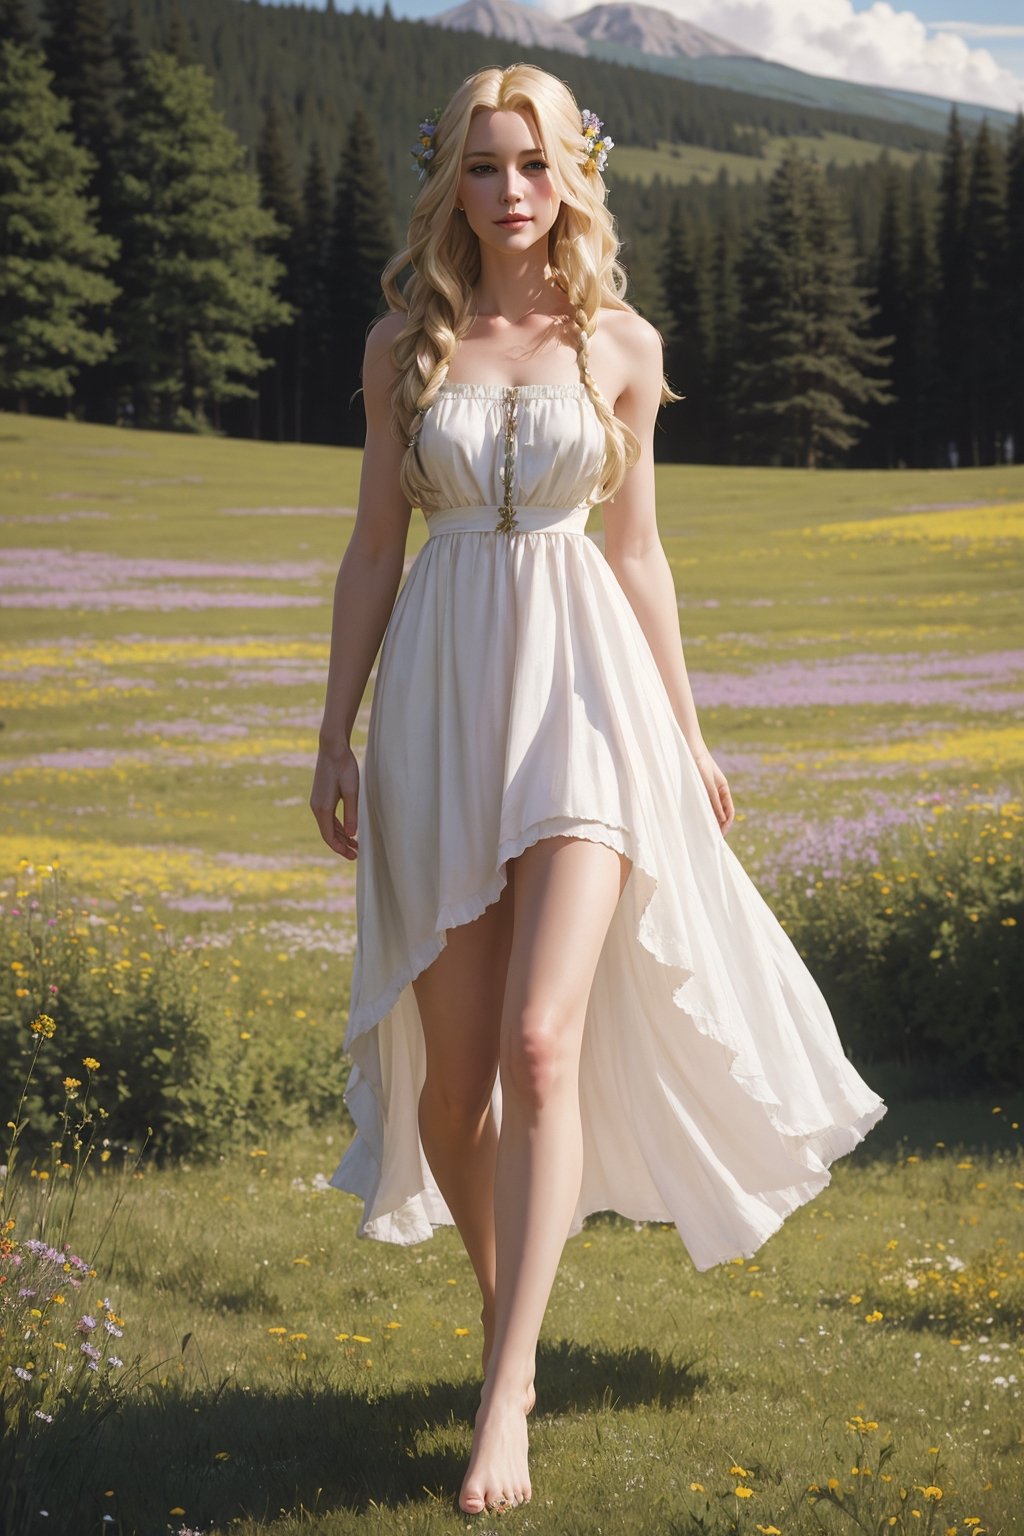 Portrait of a 25-year-old girl with long blonde hair, dressed in a dress made of light material, barefoot, standing in a meadow among flowers,  casual pose и posing,

 brom's art, depiction of an epic fantasy character, portrait of a character, fantasy art, works by Richard Schmid, A.Mukha, Volegov, impressionism